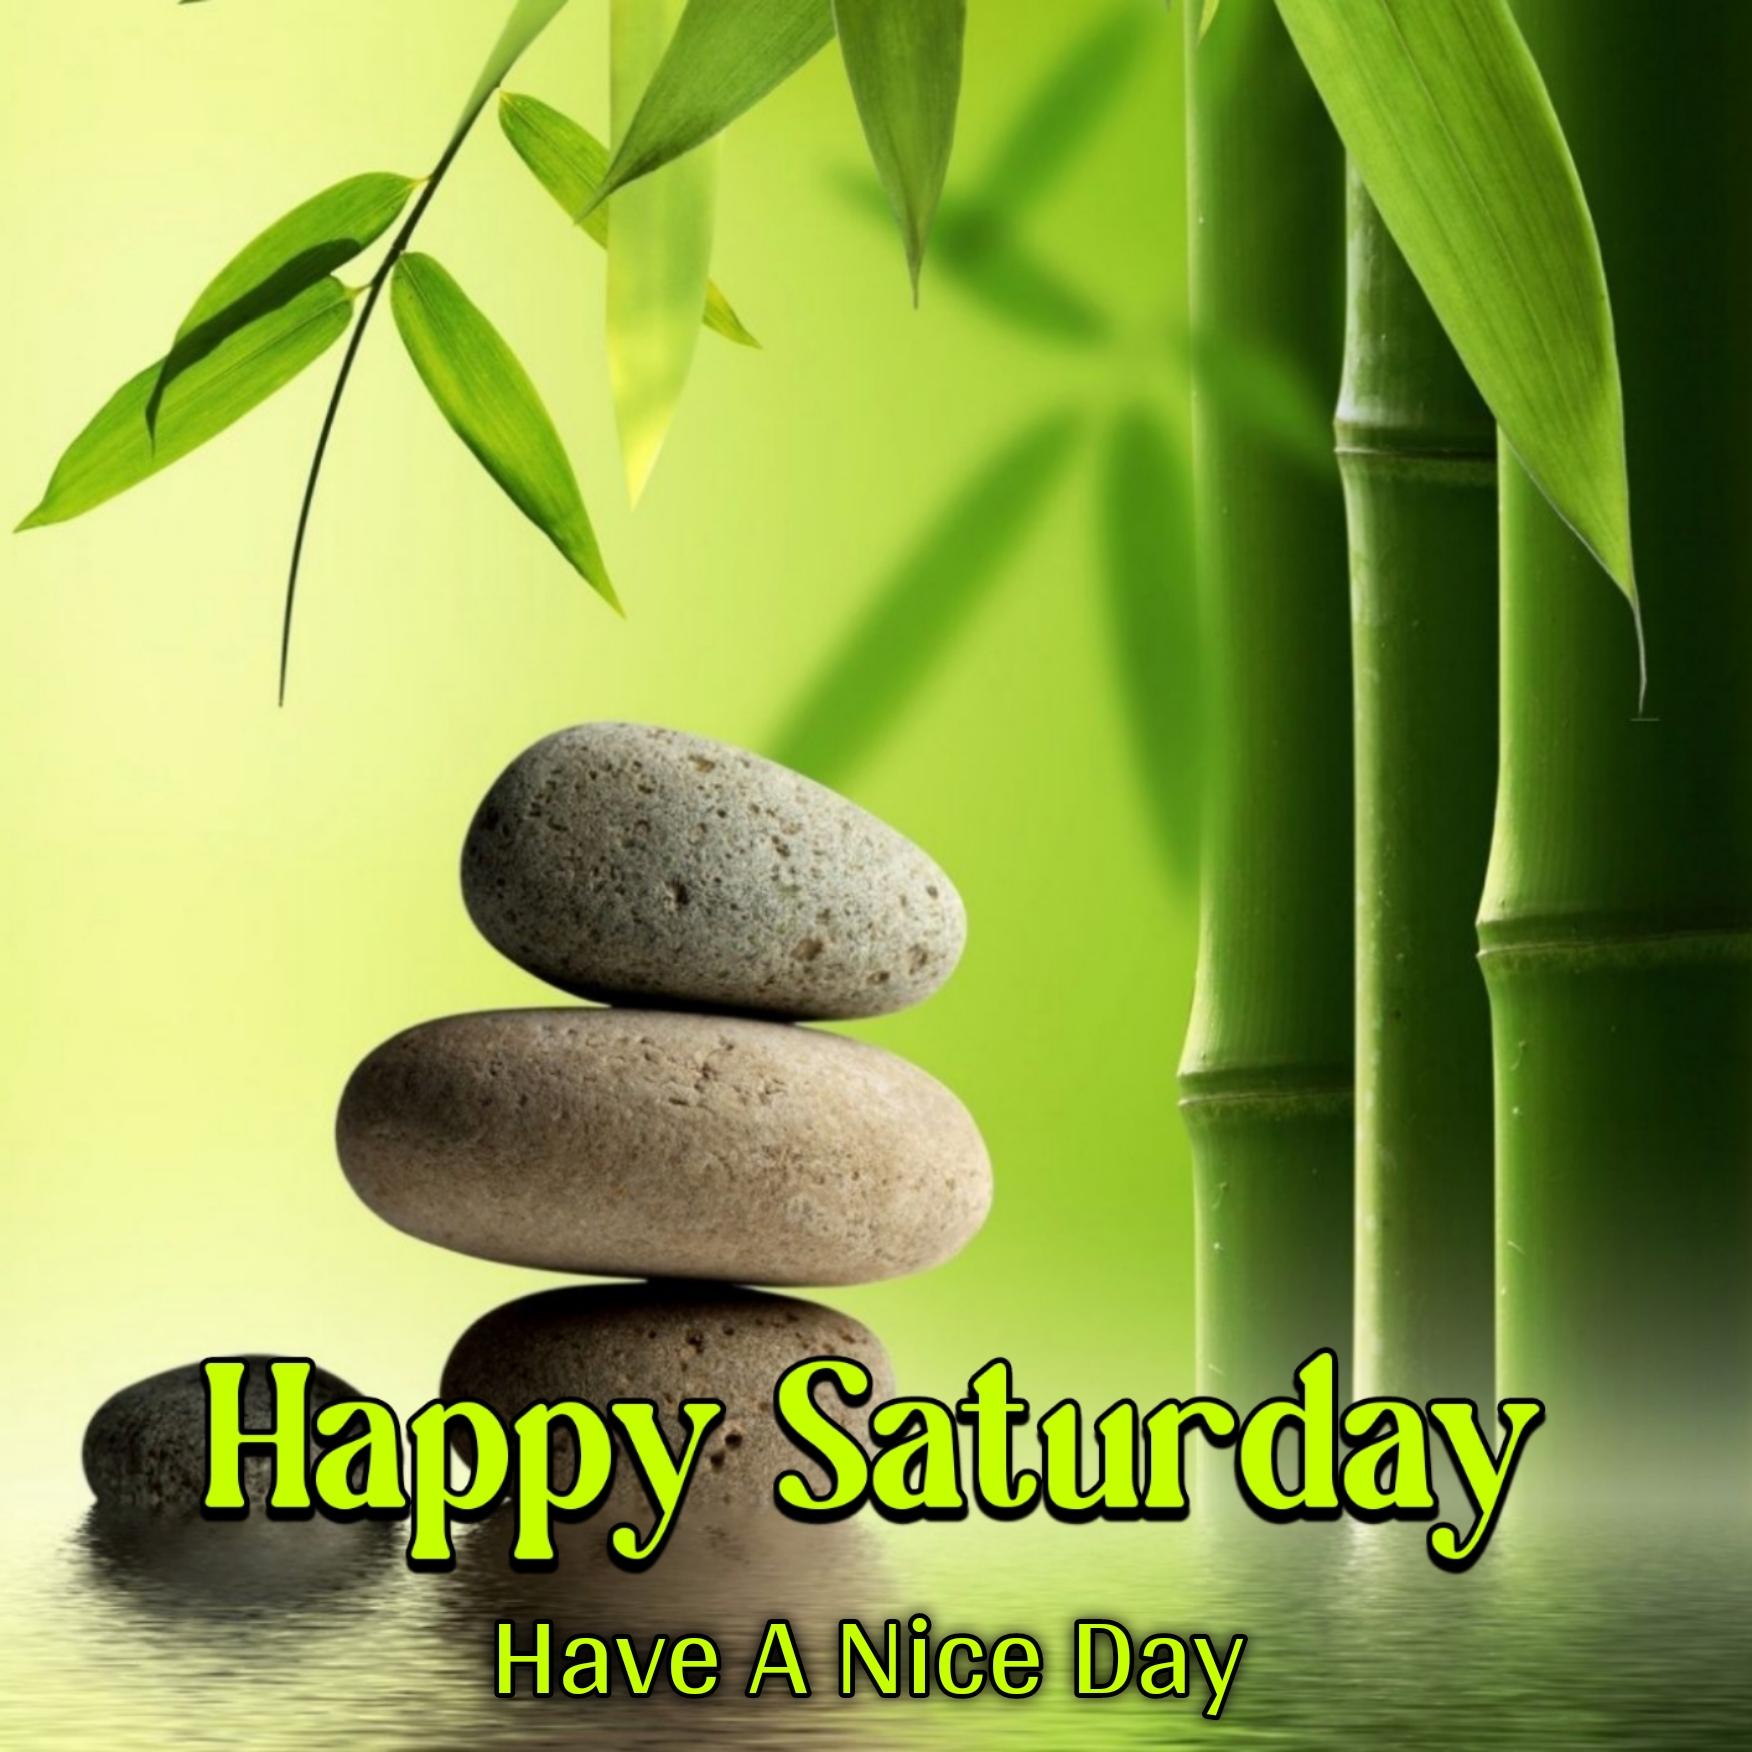 Happy Saturday Have A Nice Day Images